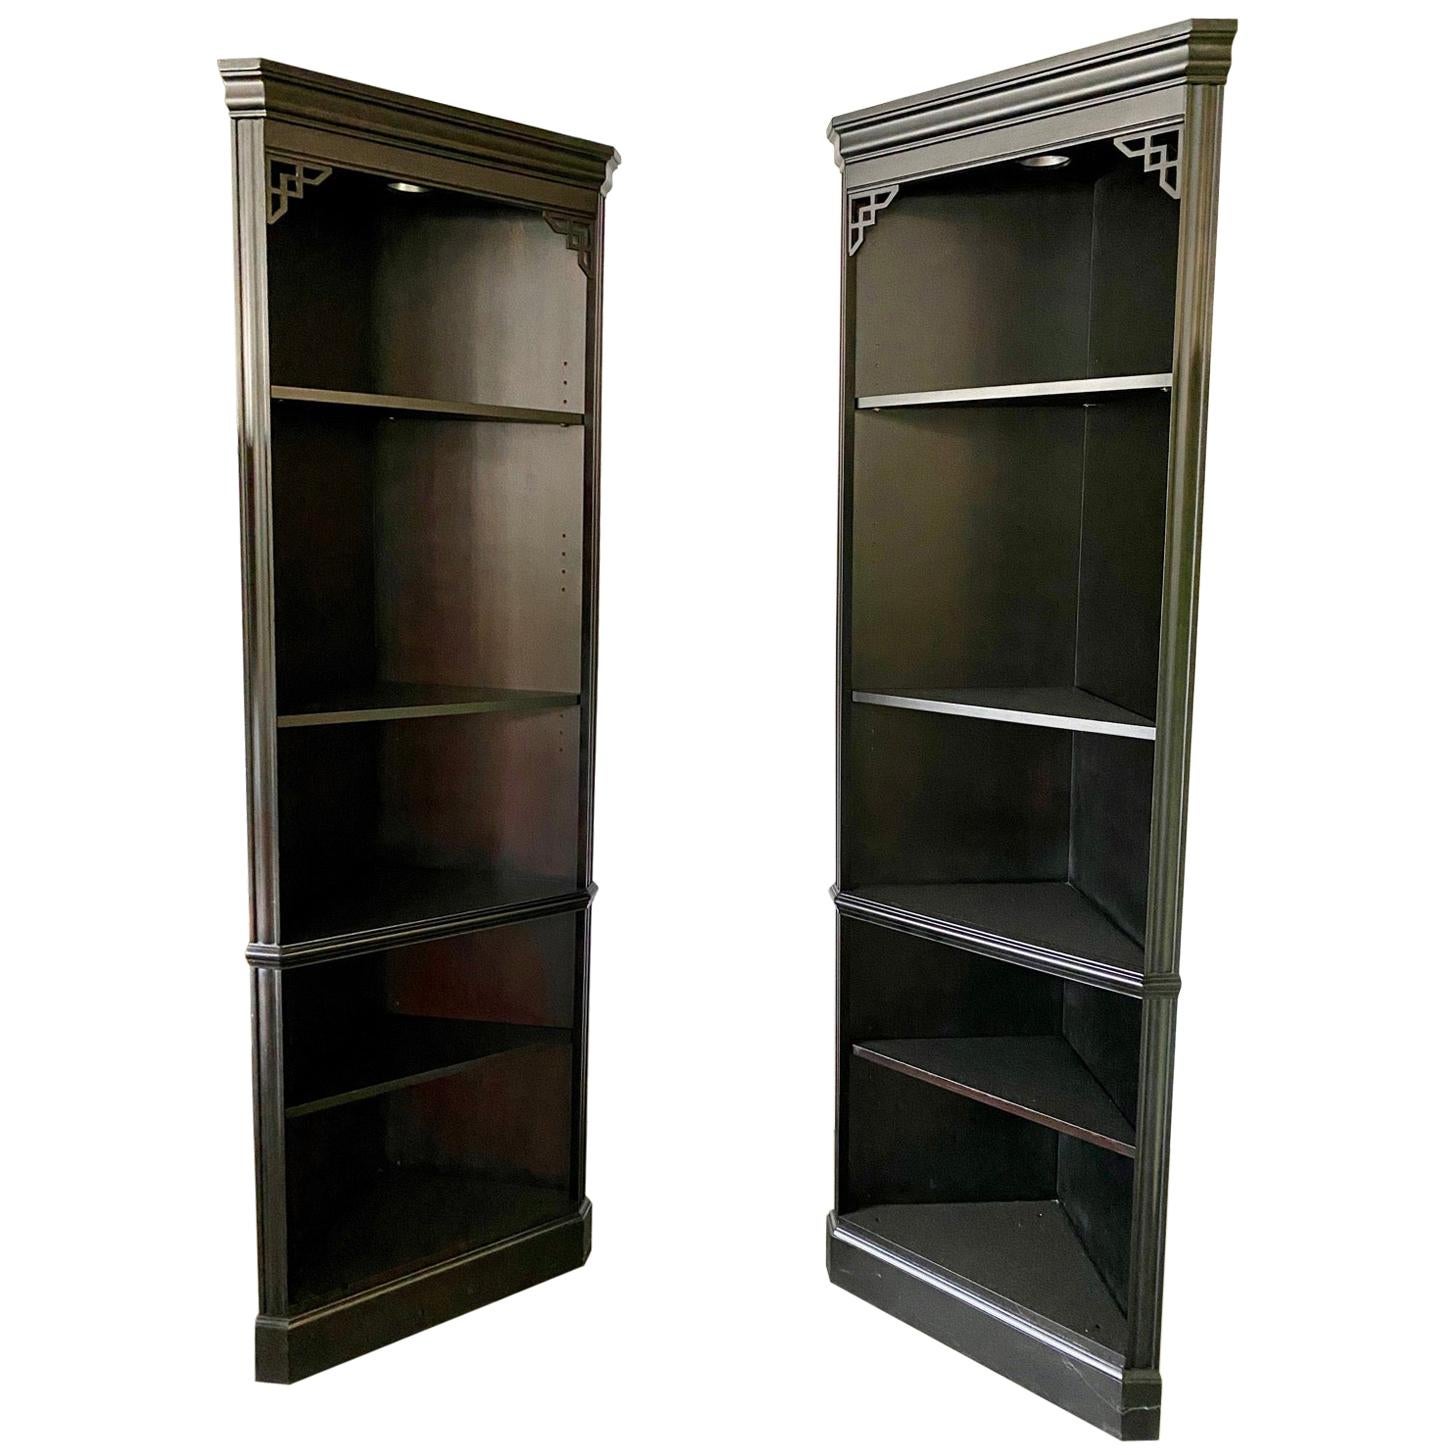 Pair of Chippendale Style Five-Shelf Corner Cupboards